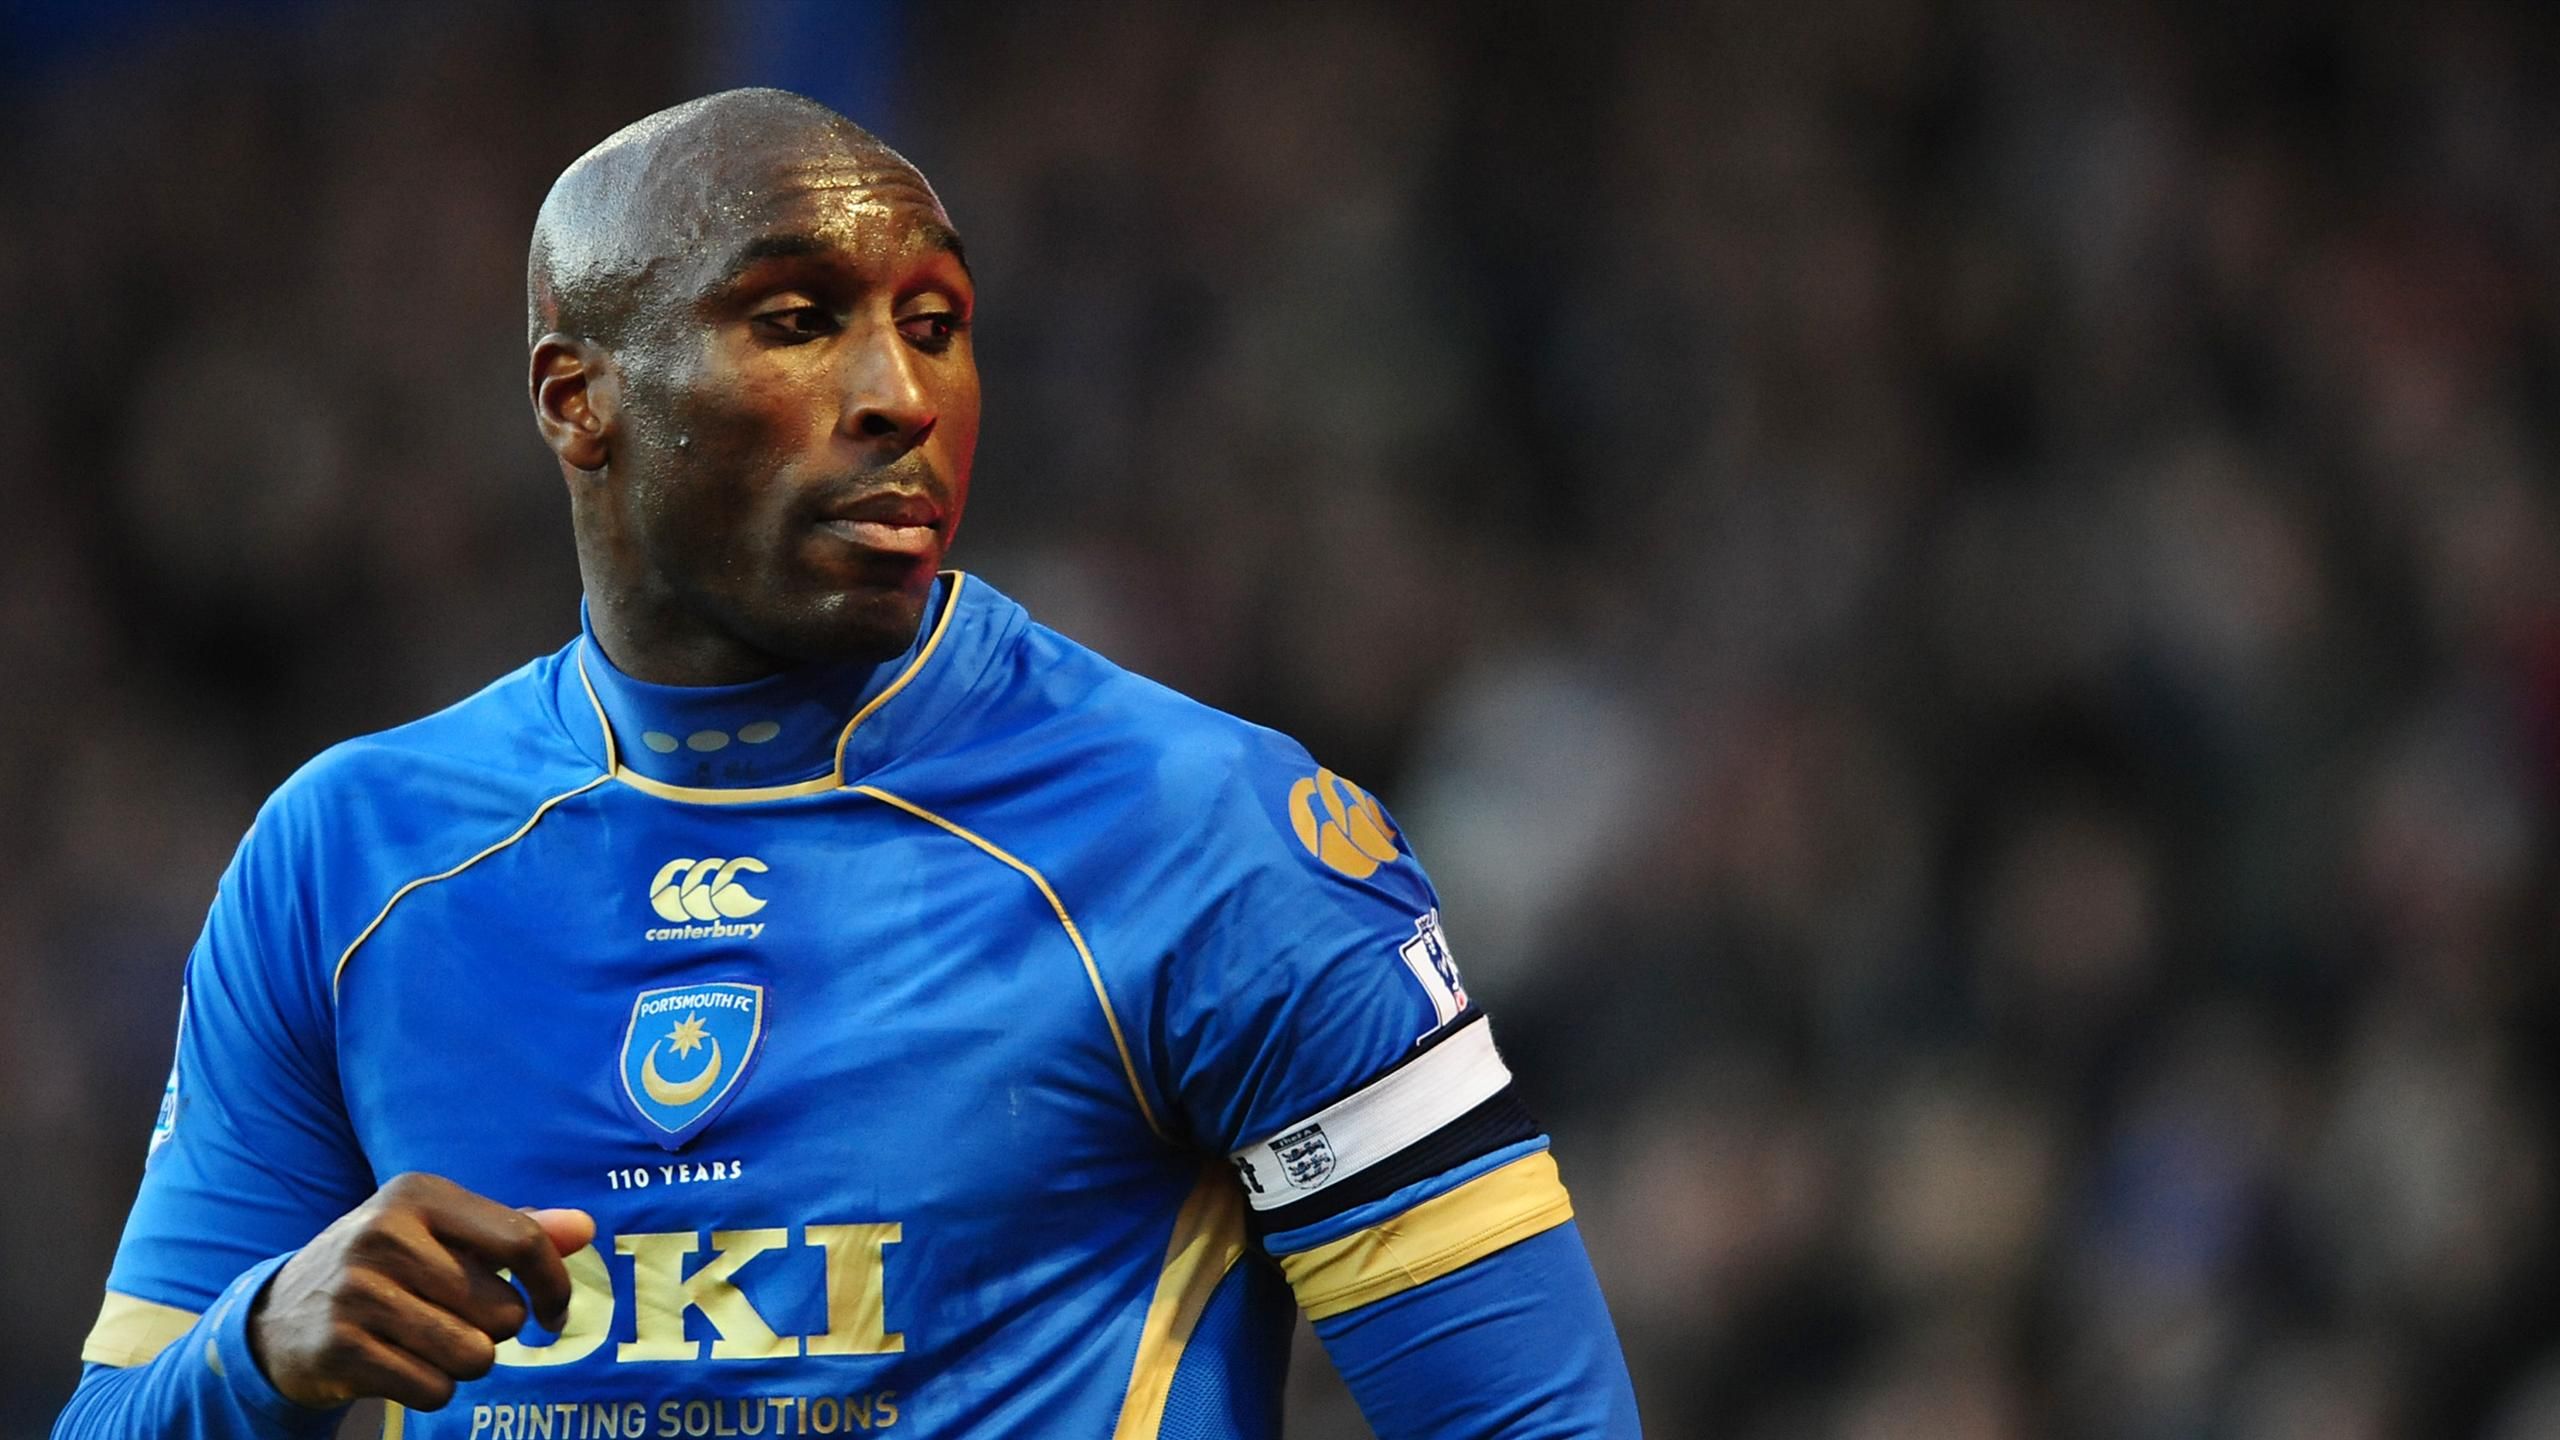 Sol Campbell sues troubled Portsmouth, The Independent